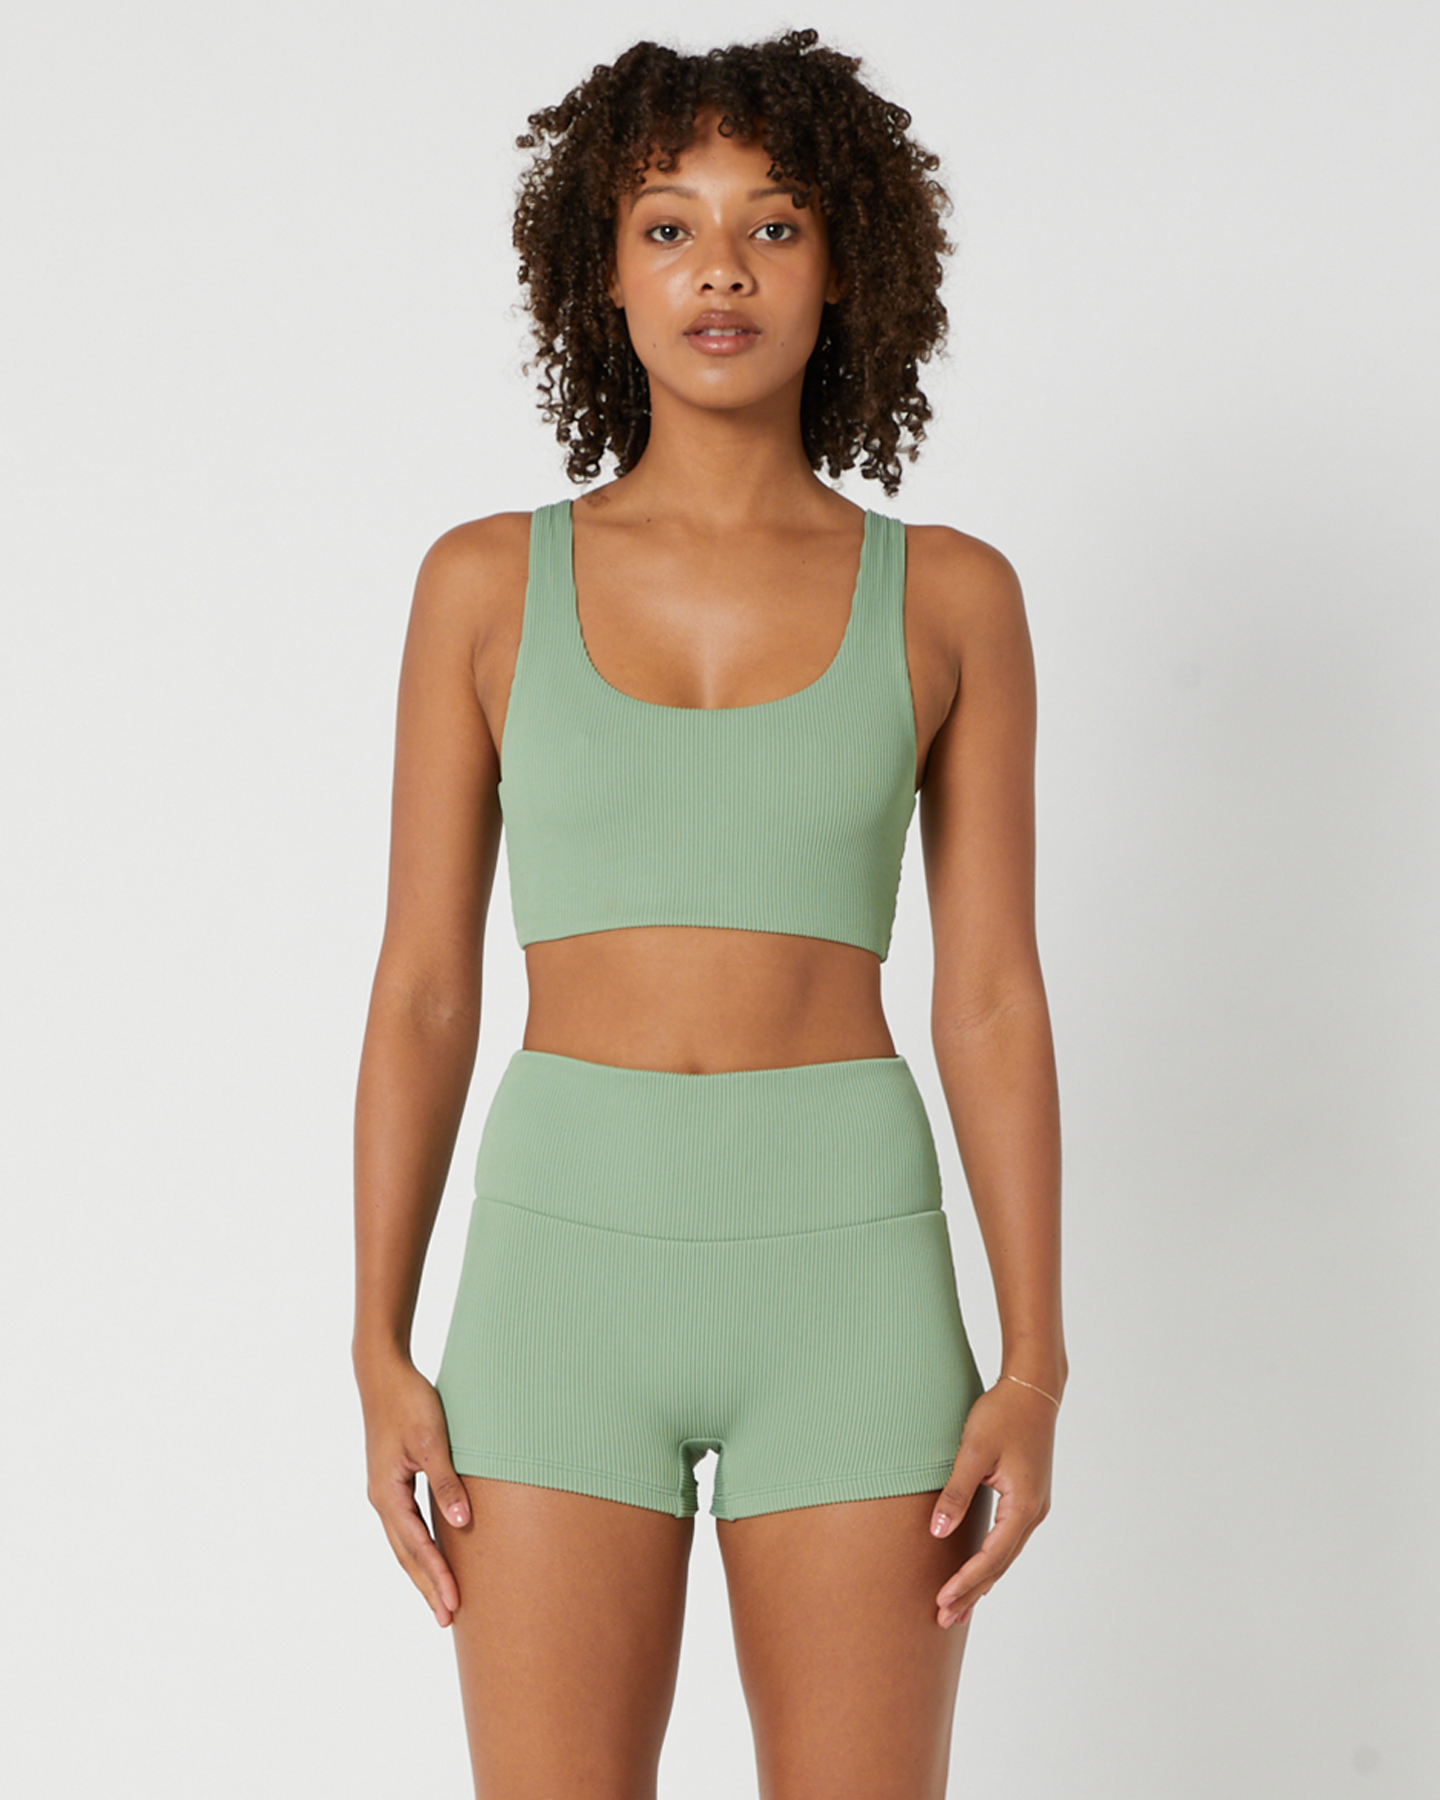 Hurley Ribbed Singlet Top - Loden Frost